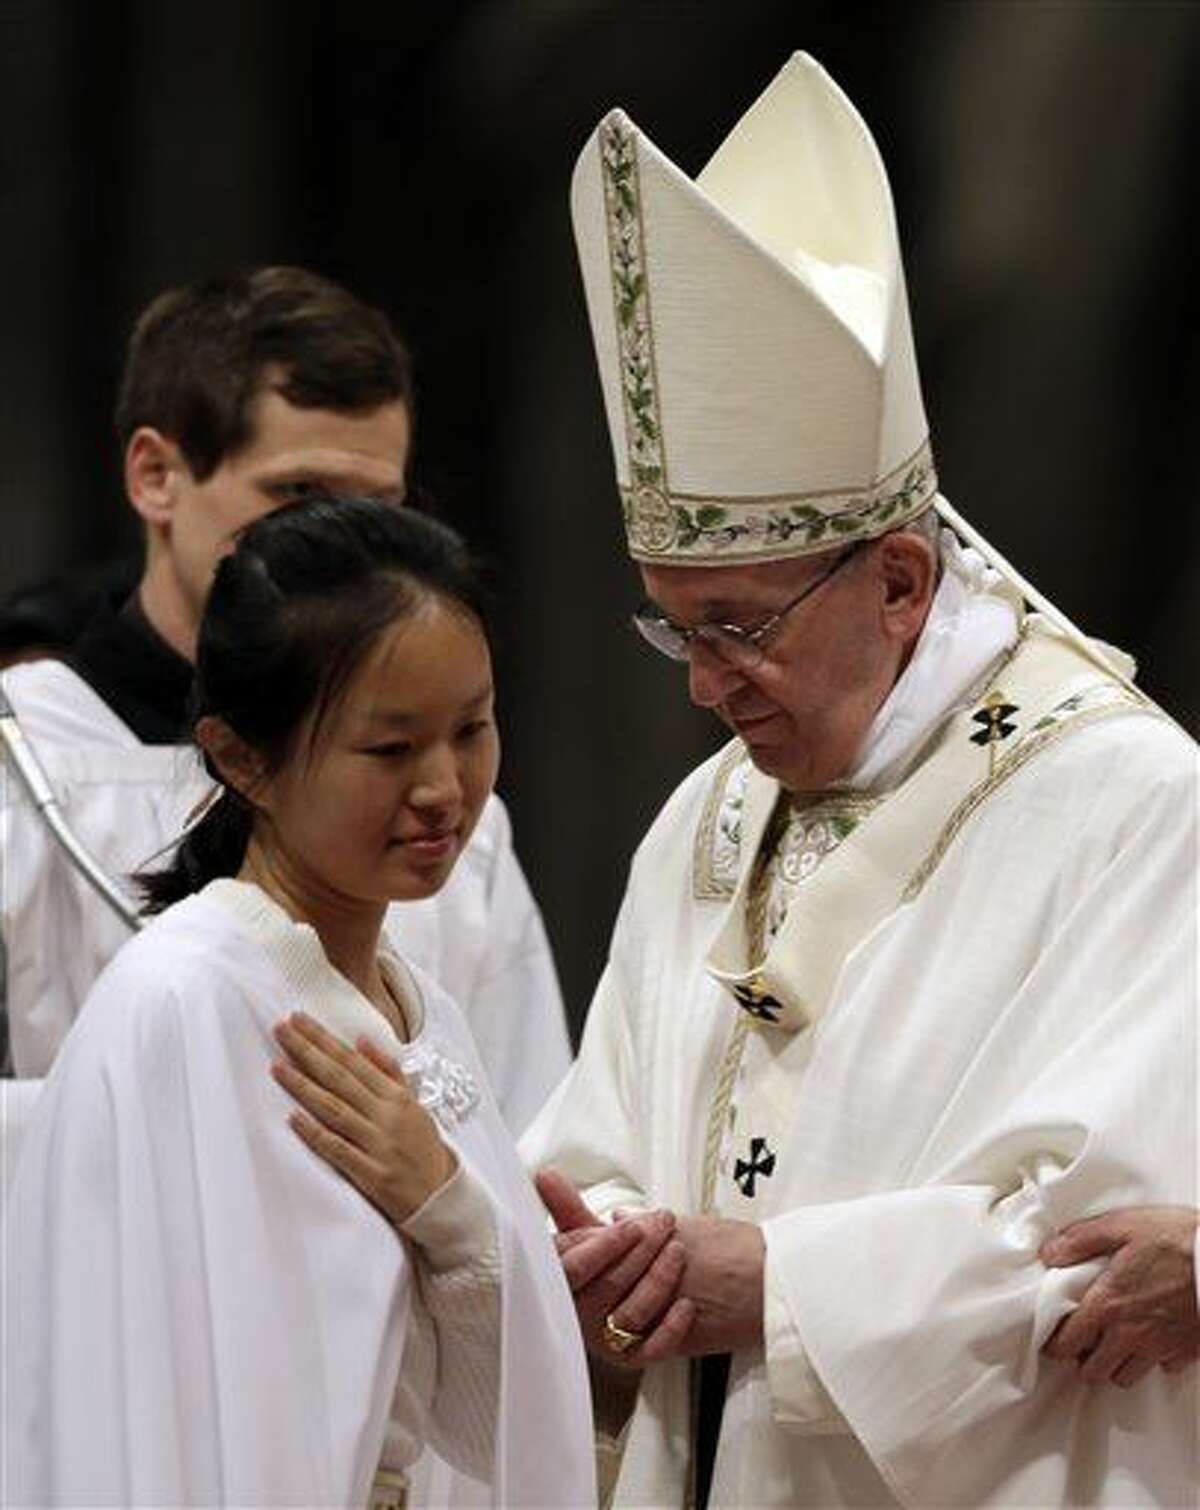 Li Zhang, Mary Stella, of China, walks past Pope Francis after being baptized during an Easter vigil service, in St. Peter's Basilica, at the Vatican, Saturday, March 26, 2016. (AP Photo/Gregorio Borgia)